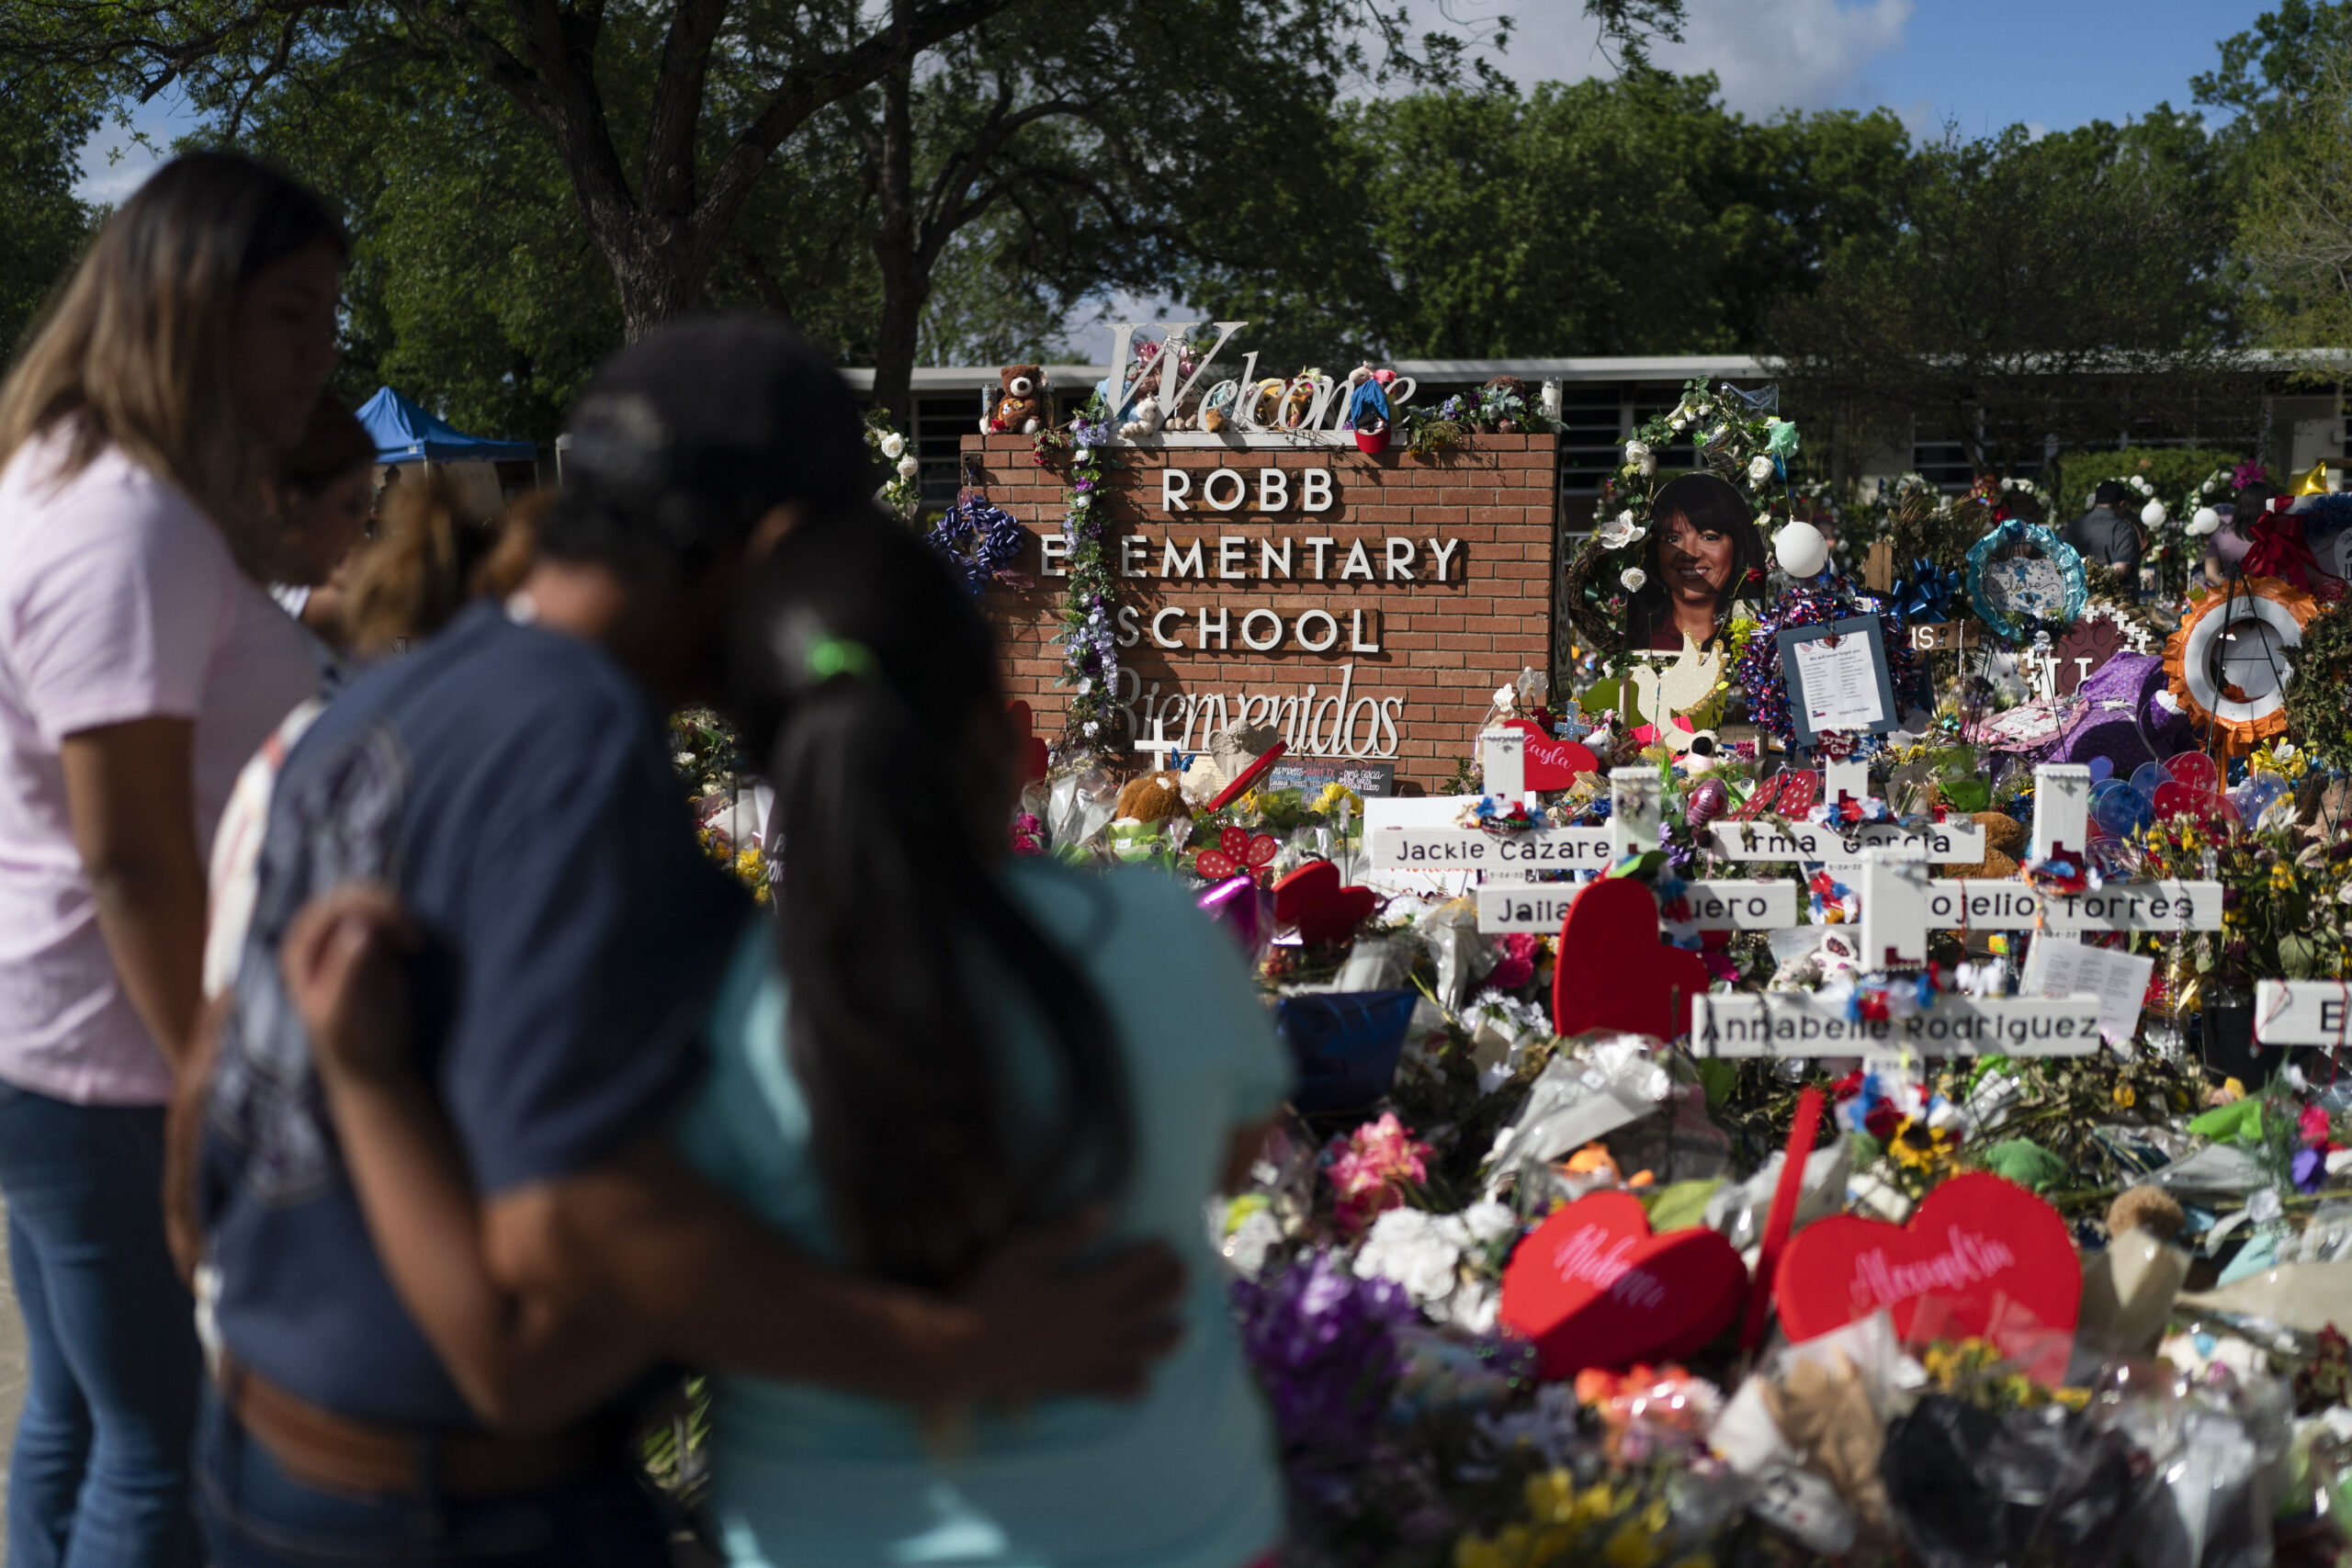 FILE - People visit a memorial at Robb Elementary School in Uvalde, Texas, on June 2, 2022, to pay their respects to the victims killed in a school shooting. A legislative committee investigating the deadly shooting at the Texas elementary school is set to hear more testimony from law enforcement officers on Monday, June 20, 2022. (AP Photo/Jae C. Hong, File)